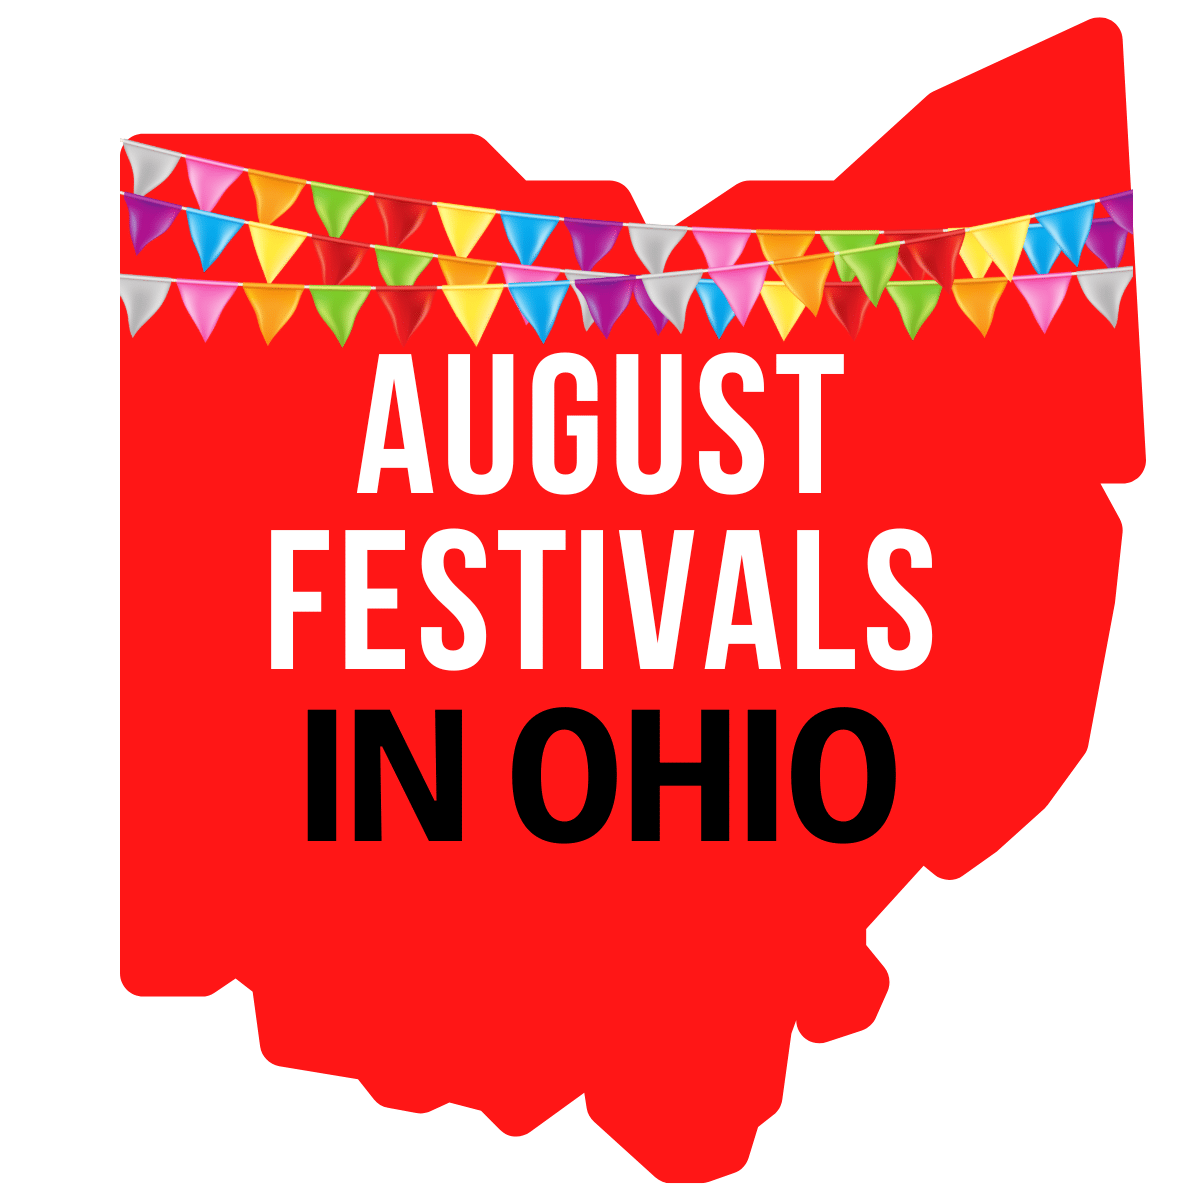 A square image of a red print of Ohio with colorful flags strung across it. It has text August Festivals in Ohio in white and black letters.